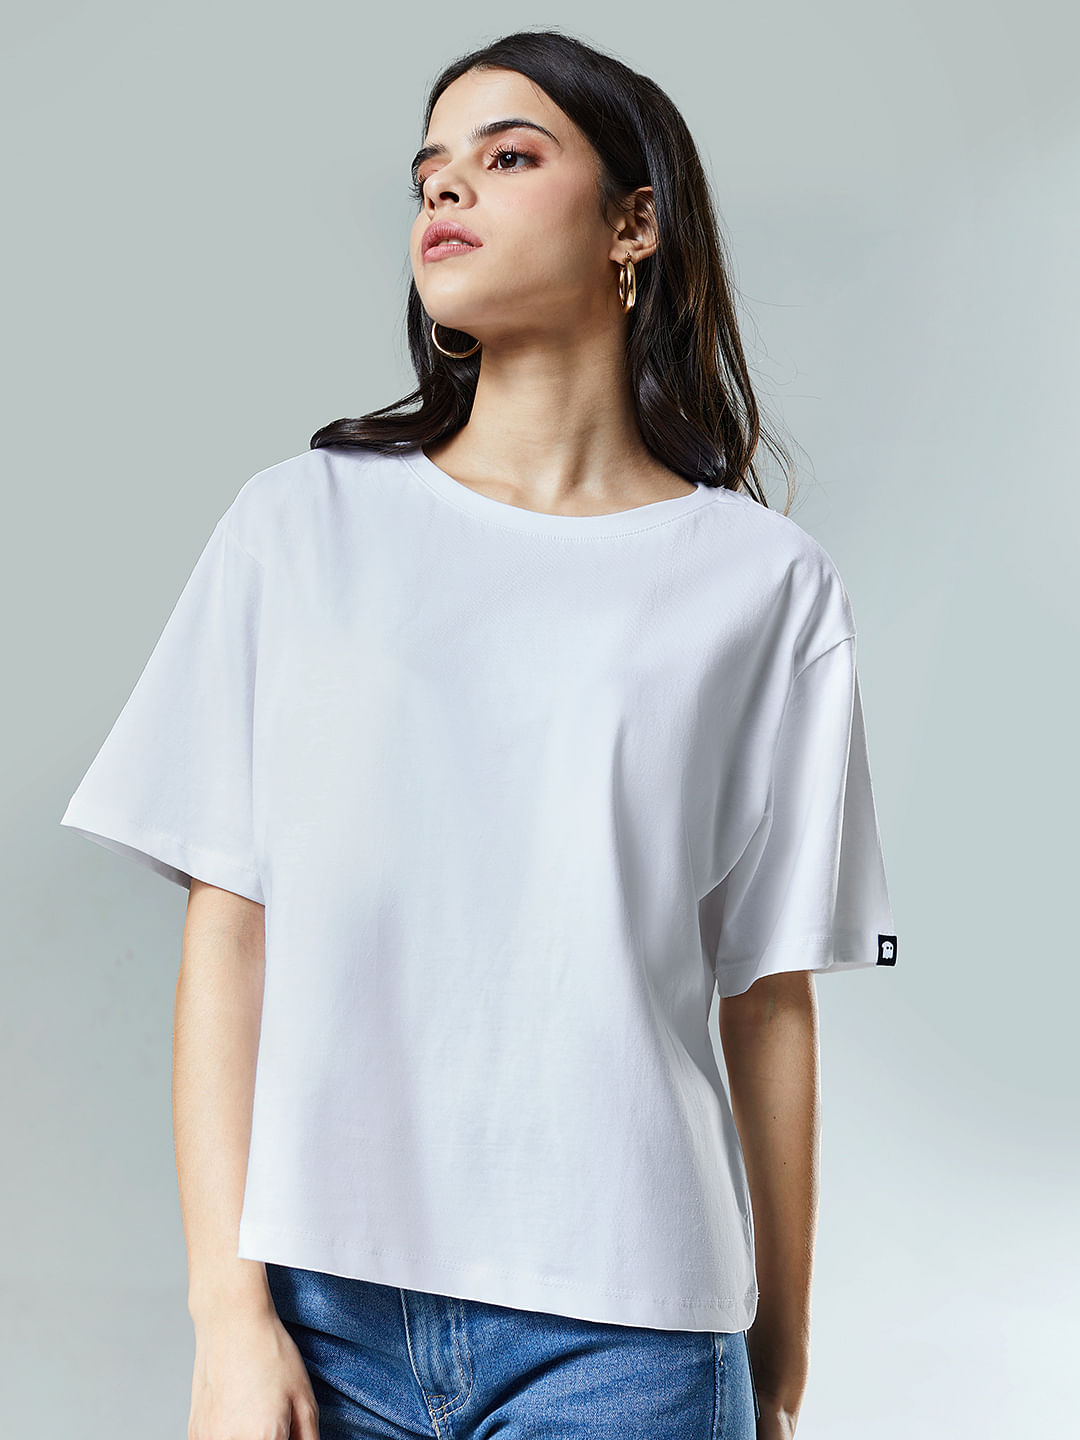 Buy Solids White Women's Oversized T-Shirt online at The Souled Store